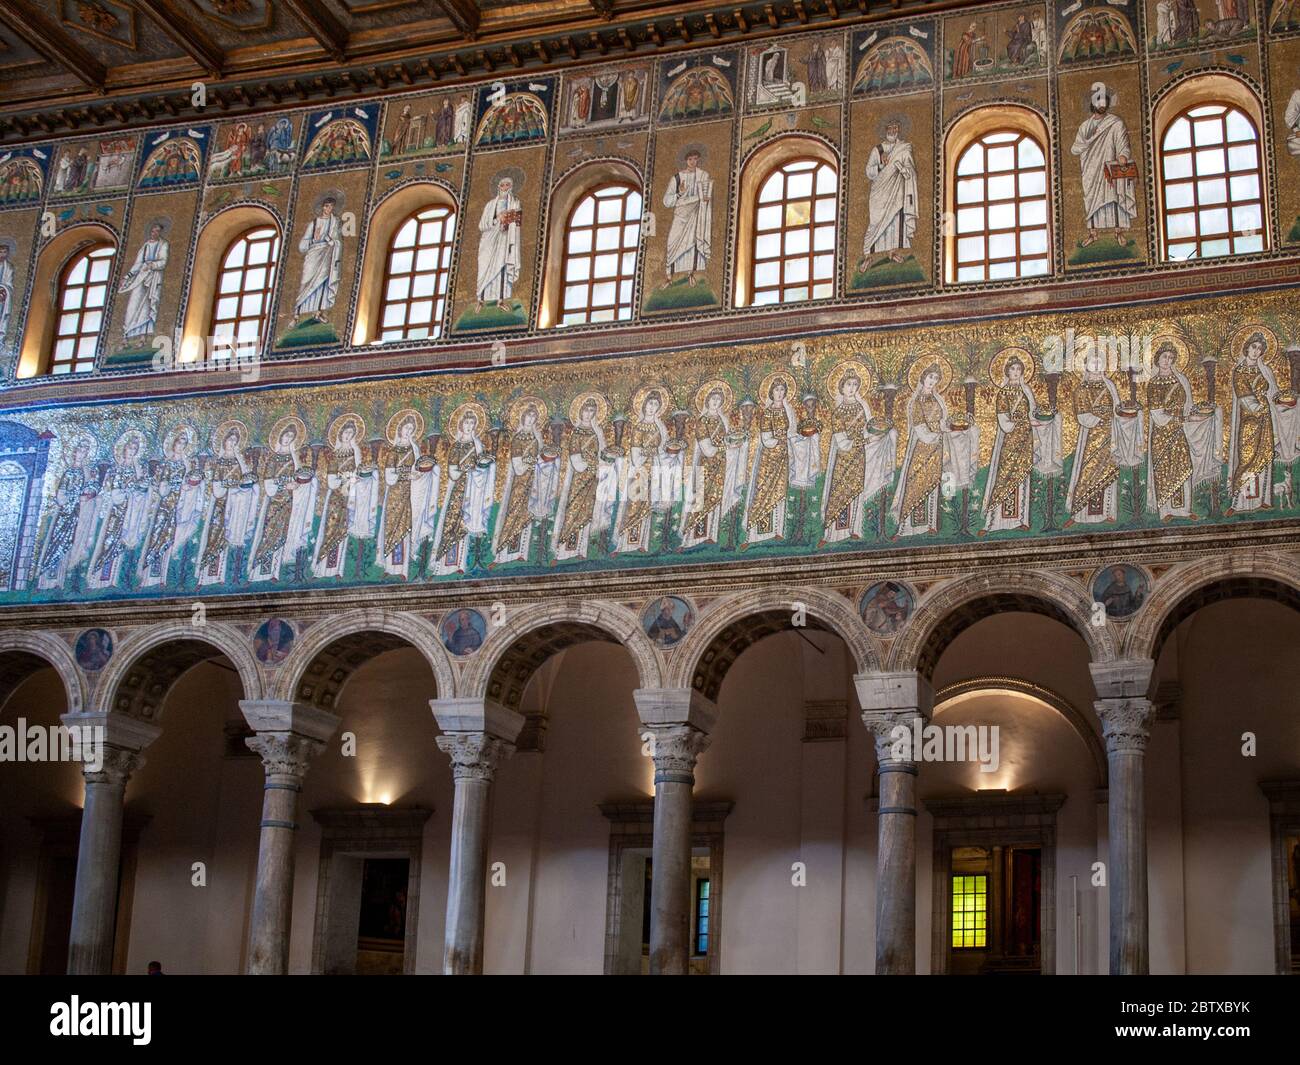 Ravenna, Italy - Sept 11, 2019: Mosaics on the side wall in Basilica of St  Apollinare Nuovo in Ravenna, Italy Stock Photo - Alamy